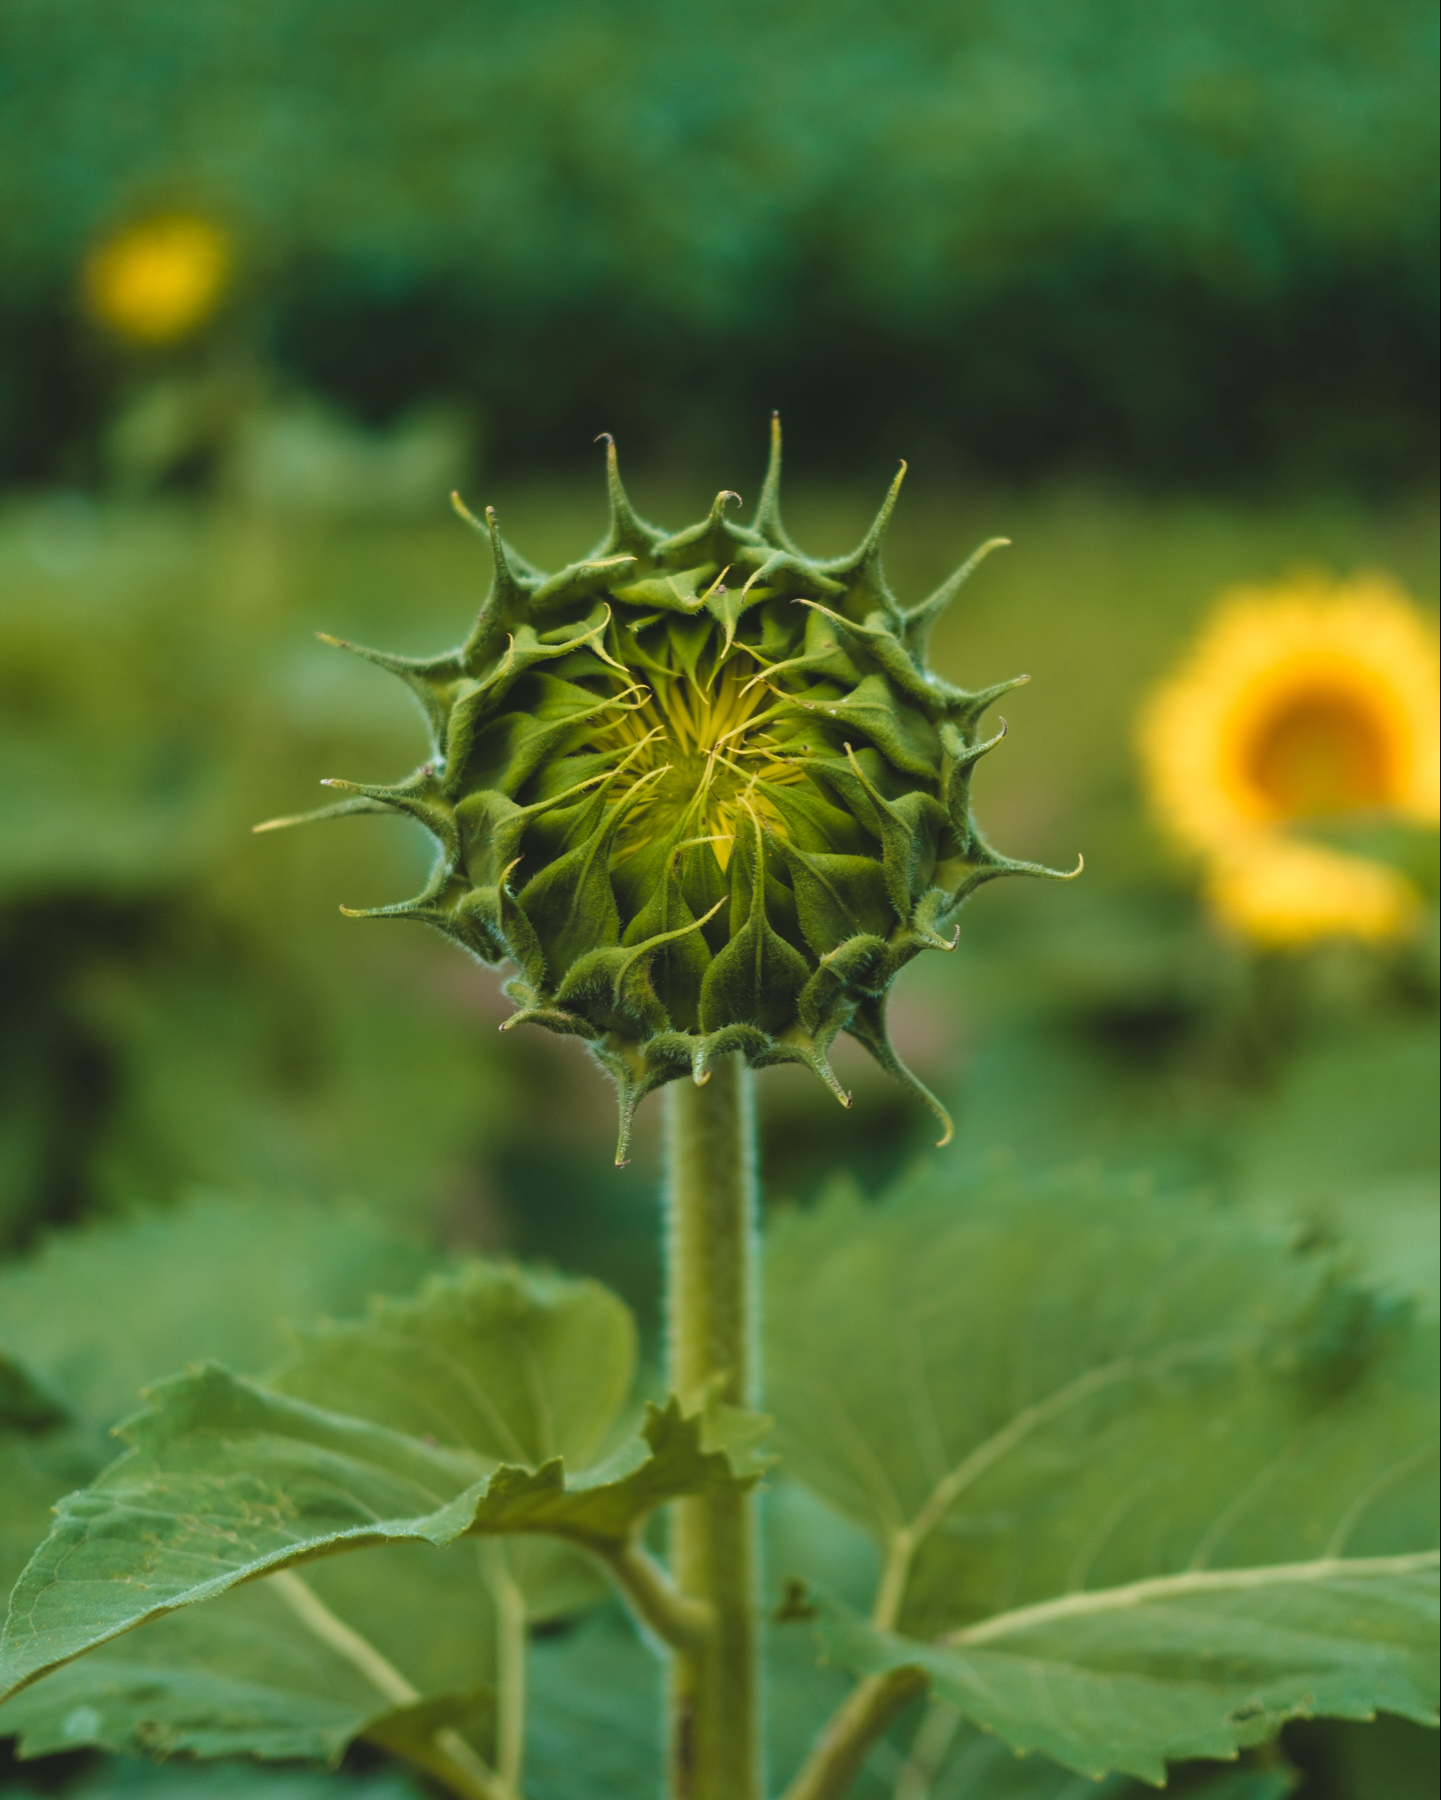 A close-up of an unopened sunflower with a fully bloomed sunflower in the background.